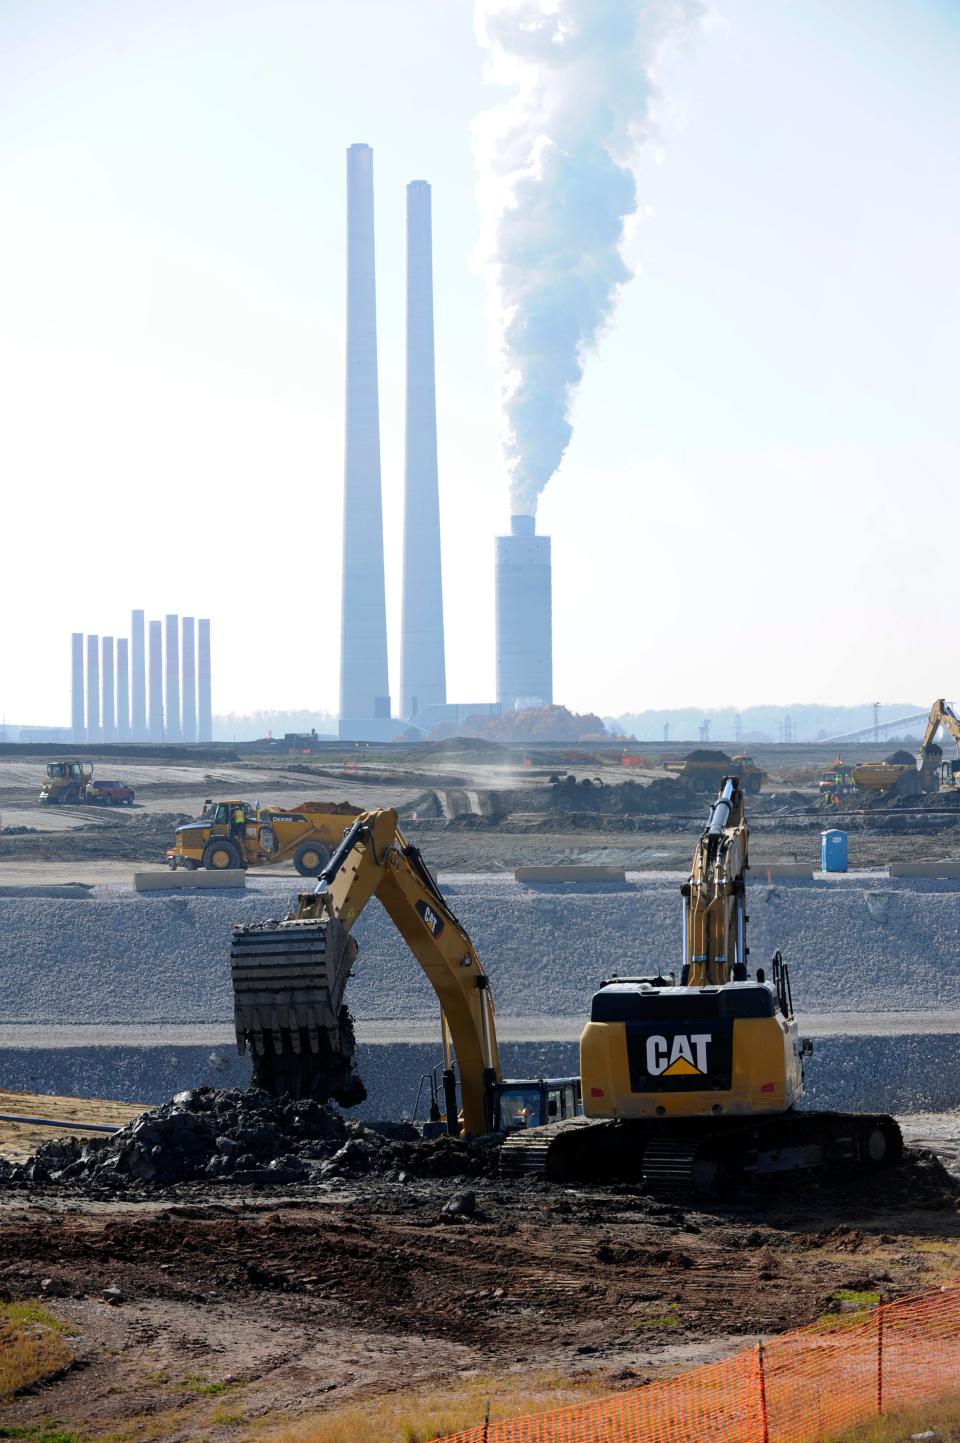 Tennessee Valley Authority contract workers remove coal ash from the edge of the Emory River next to the Kingston Fossil Plant on Nov. 8, 2012, as part of the cleanup from the December 2008 spill.
(NEWS SENTINEL ARCHIVES)